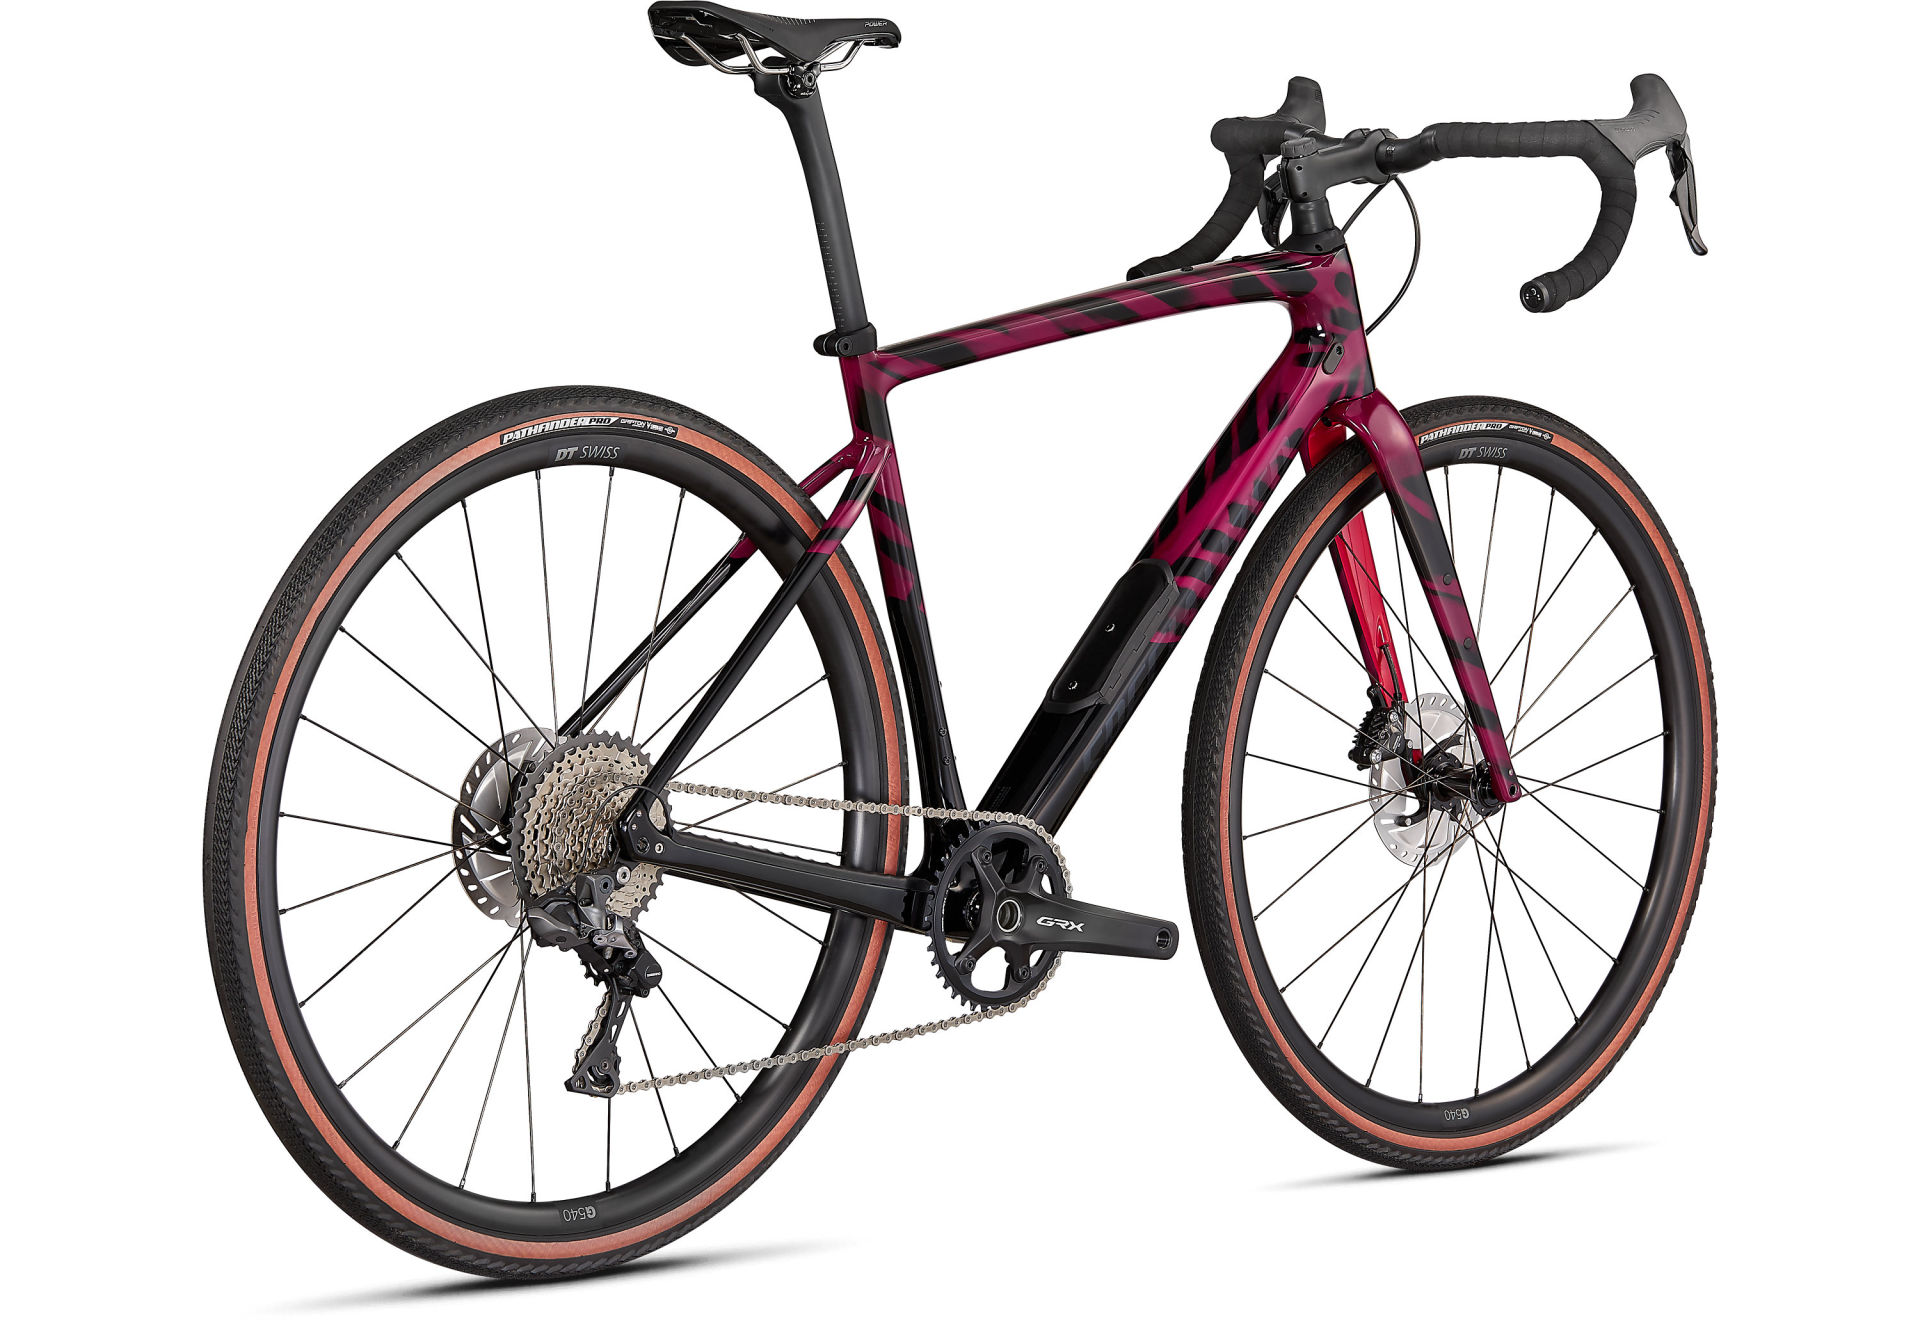 Specialized diverge. Specialized Diverge Expert Carbon 2020. Велосипед specialized Diverge a1. Specialized Diverge Expert Carbon 2019. Specialized Diverge розовый.